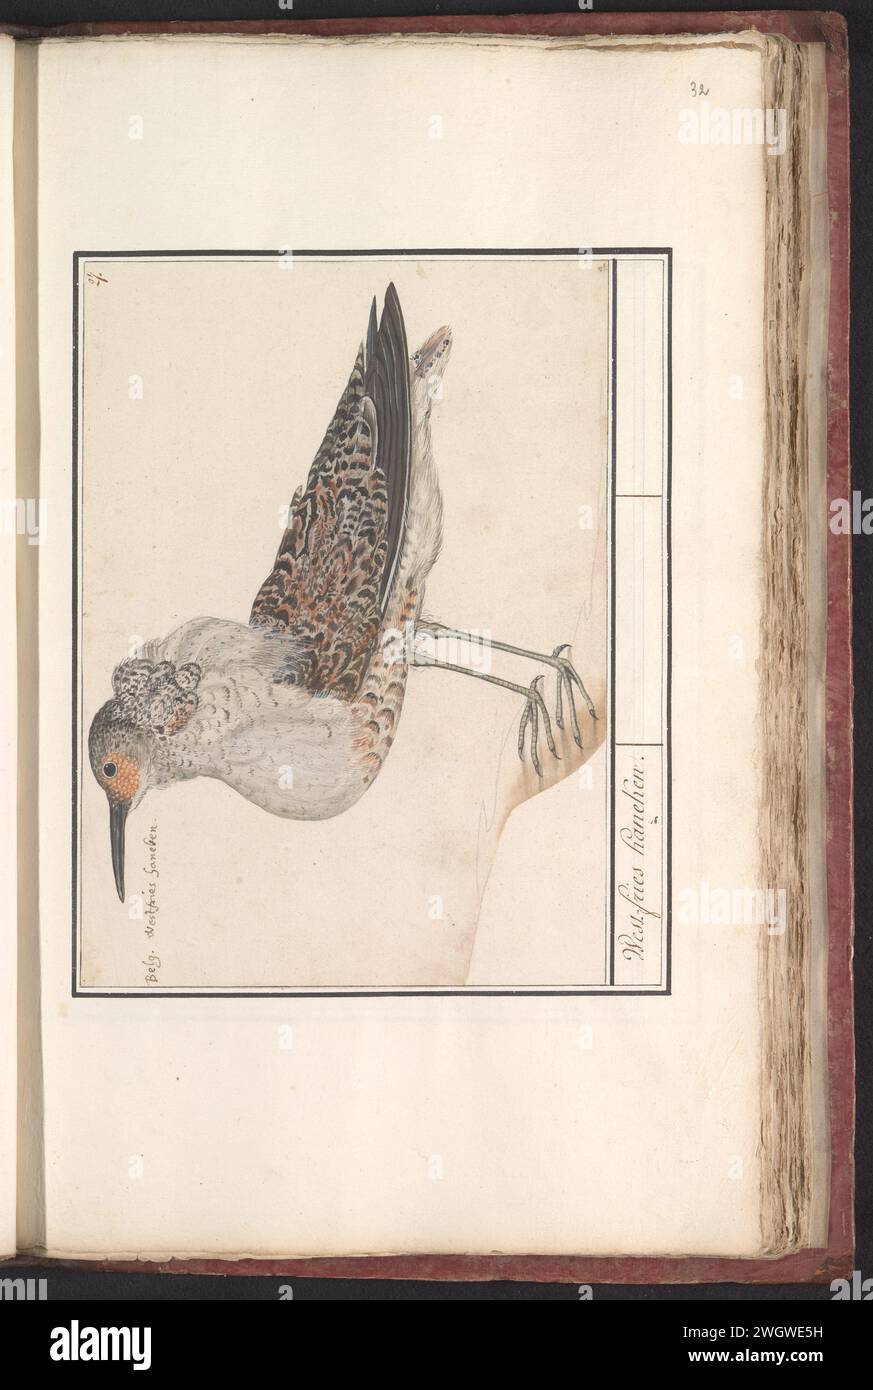 Kemphaan (Philomachus aggressive), Anselm Bootius de Boodt, 1596 - 1610 drawing Ruff. Numbered at the top right: 27. At the top left the Dutch name. Part of the third album with drawings of birds. Fifth of twelve albums with drawings of animals, birds and plants known around 1600, commissioned by Emperor Rudolf II. With explanation in Dutch, Latin and French. draughtsman: Praagdraughtsman: Delft paper. watercolor (paint). deck paint. pencil. chalk. ink brush / pen shore-birds and wading-birds: ruff Stock Photo